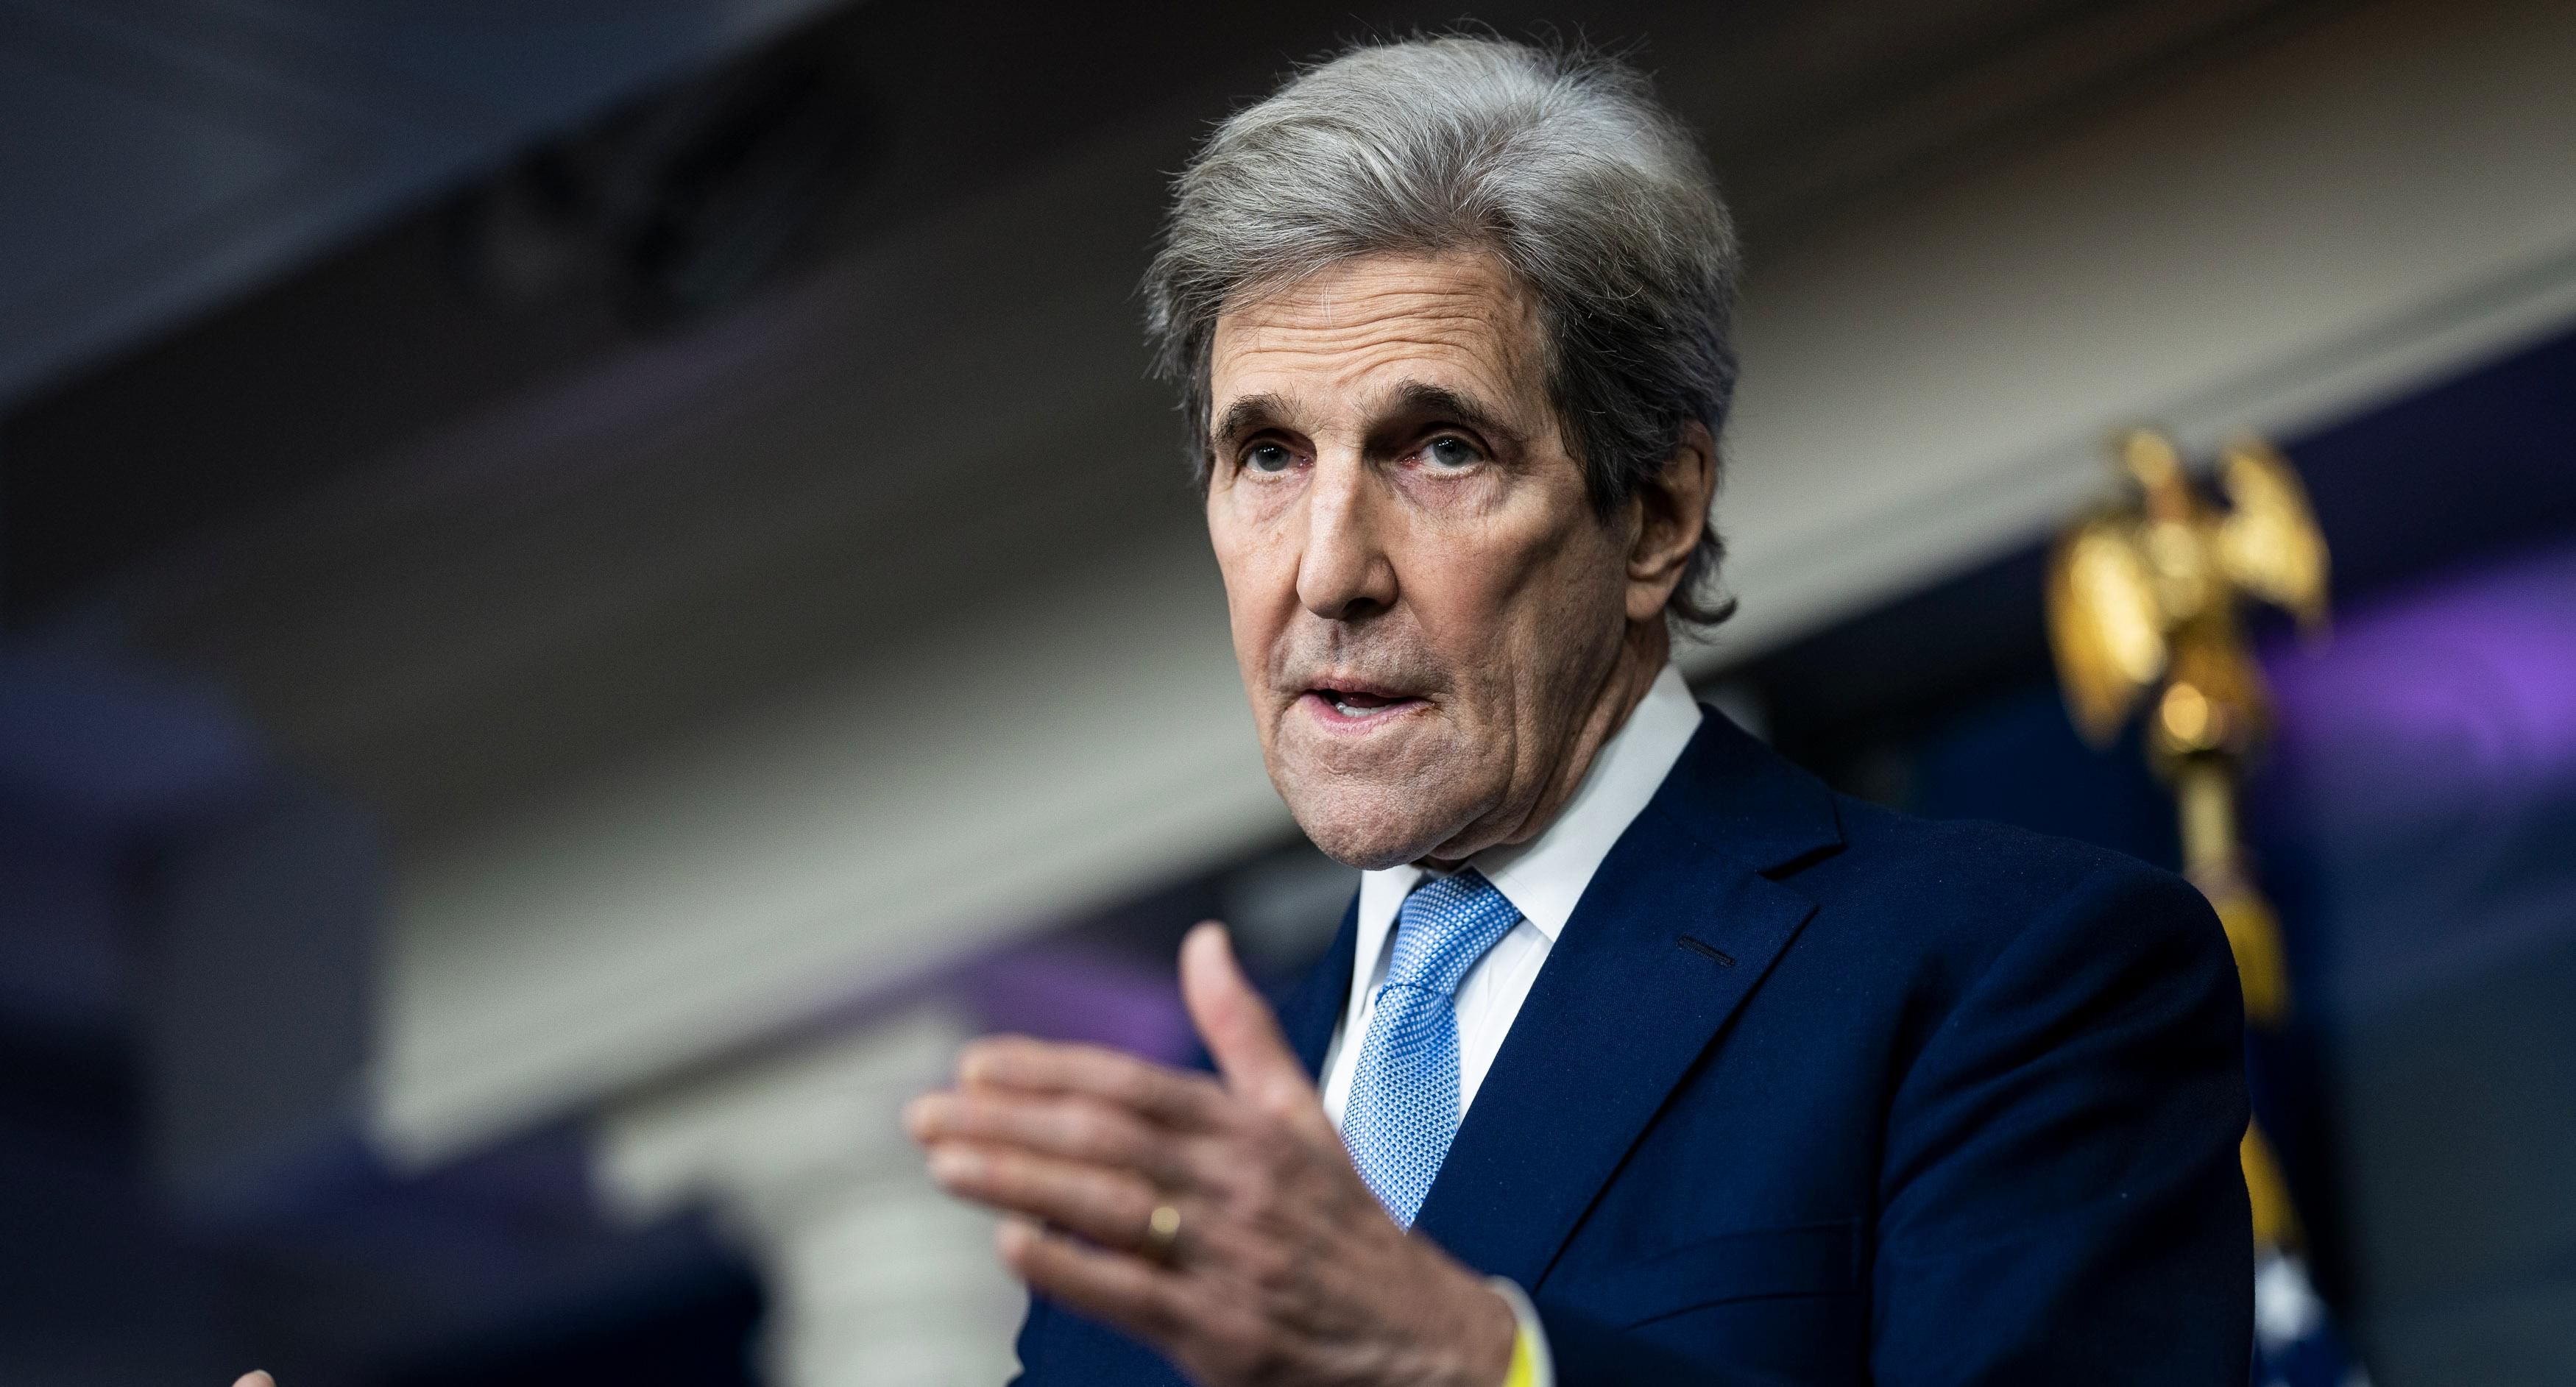 Special Presidential Envoy for Climate John Kerry speaks during a press briefing at the White House on Thursday, April 22, 2021 in Washington, DC. (Photo: Jabin Botsford/The Washington Post via Getty Images)